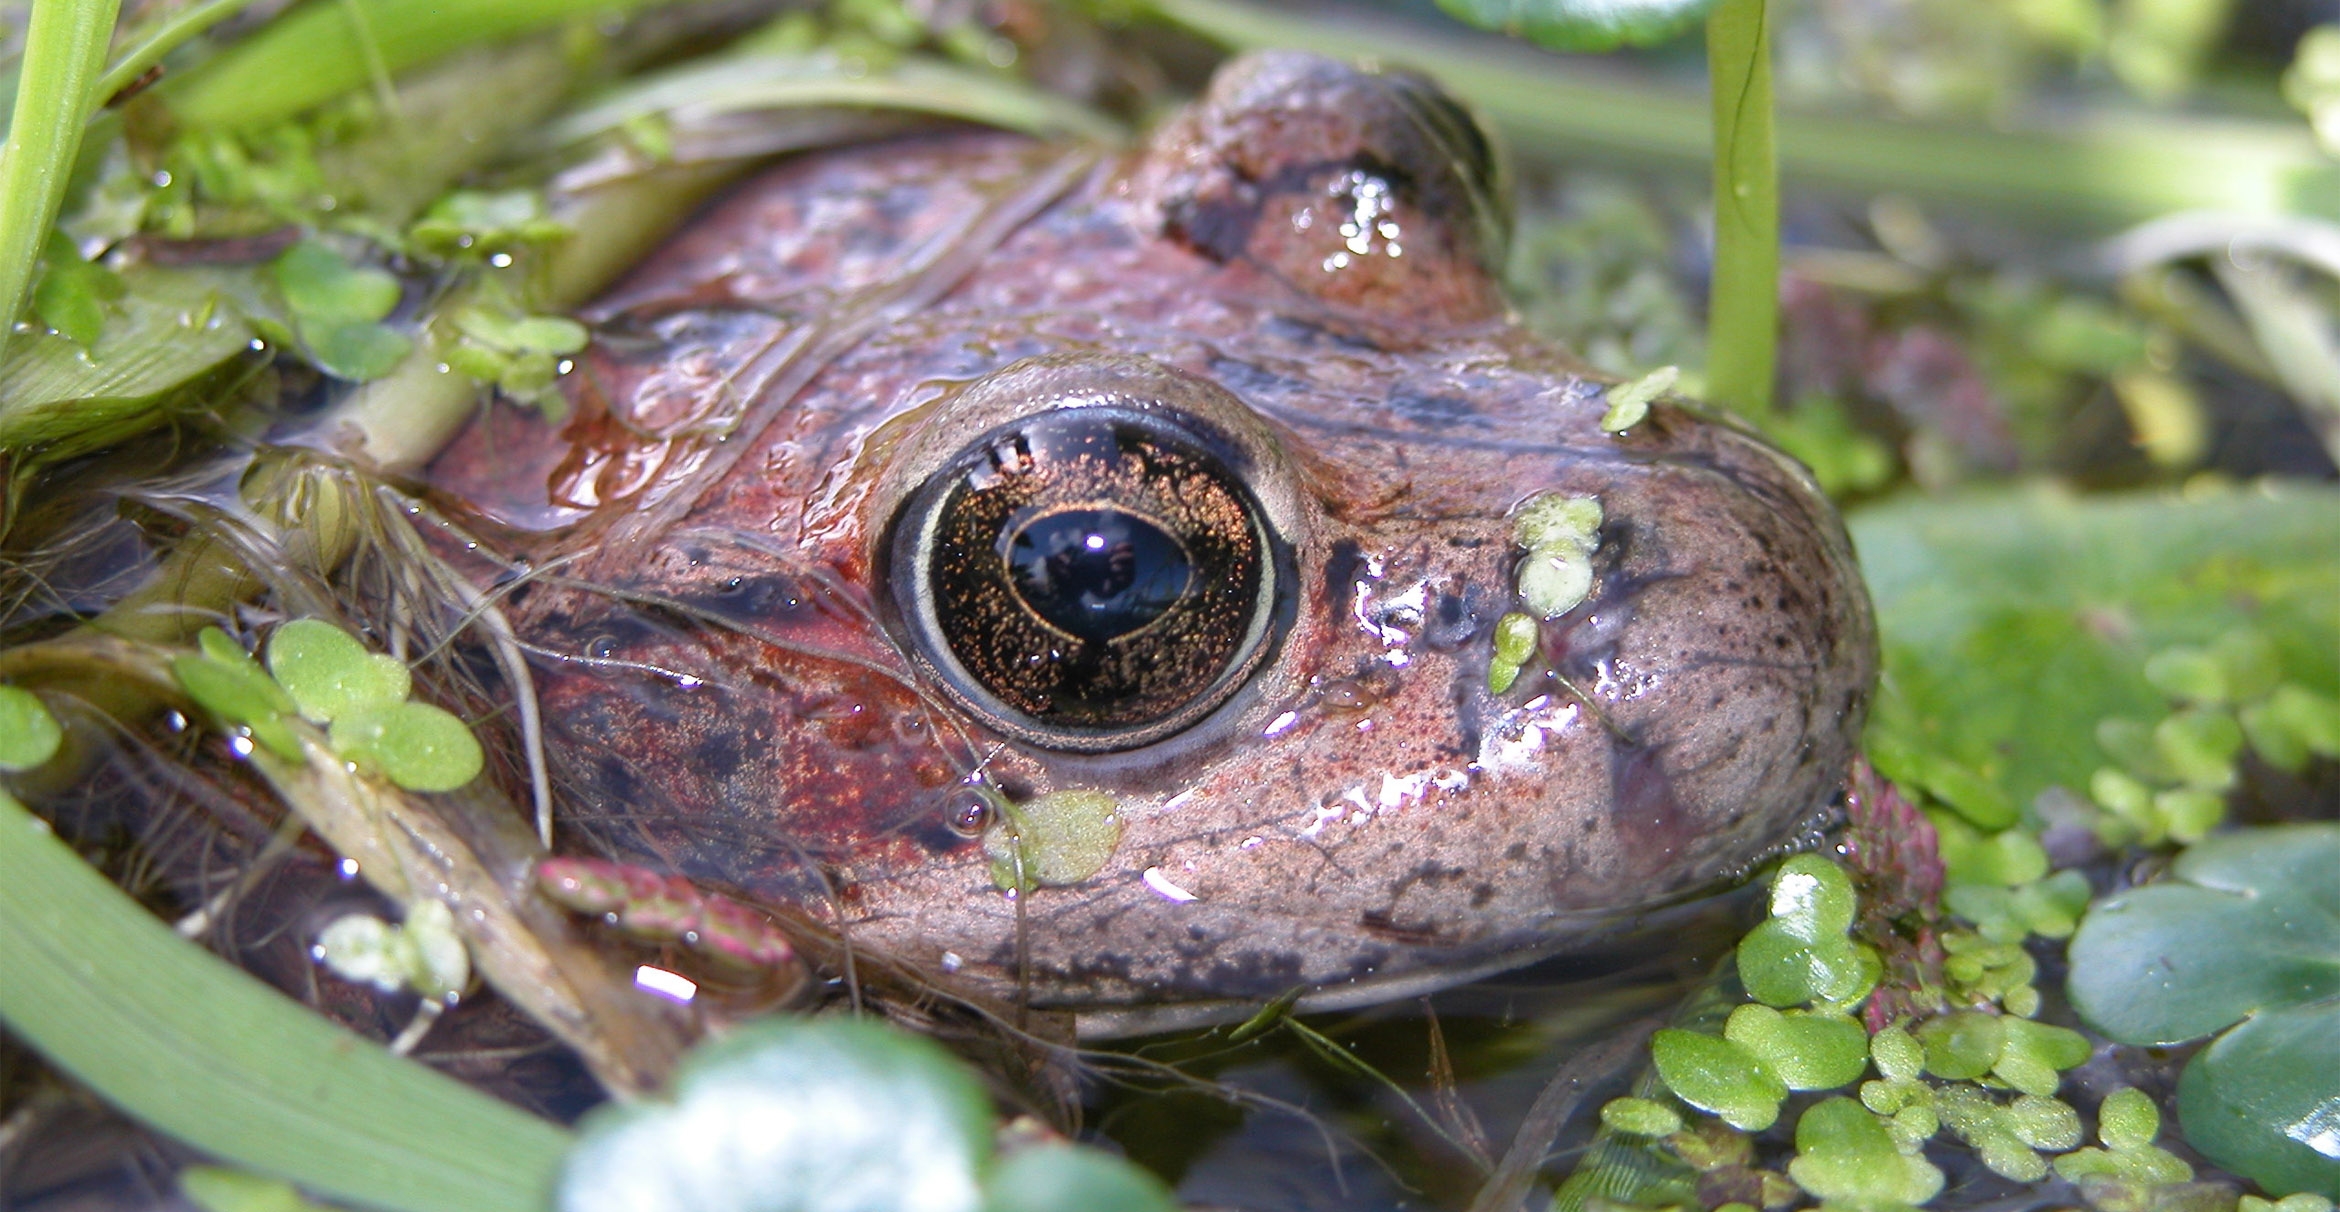 The head of a California red-legged frog peers out from lily pads